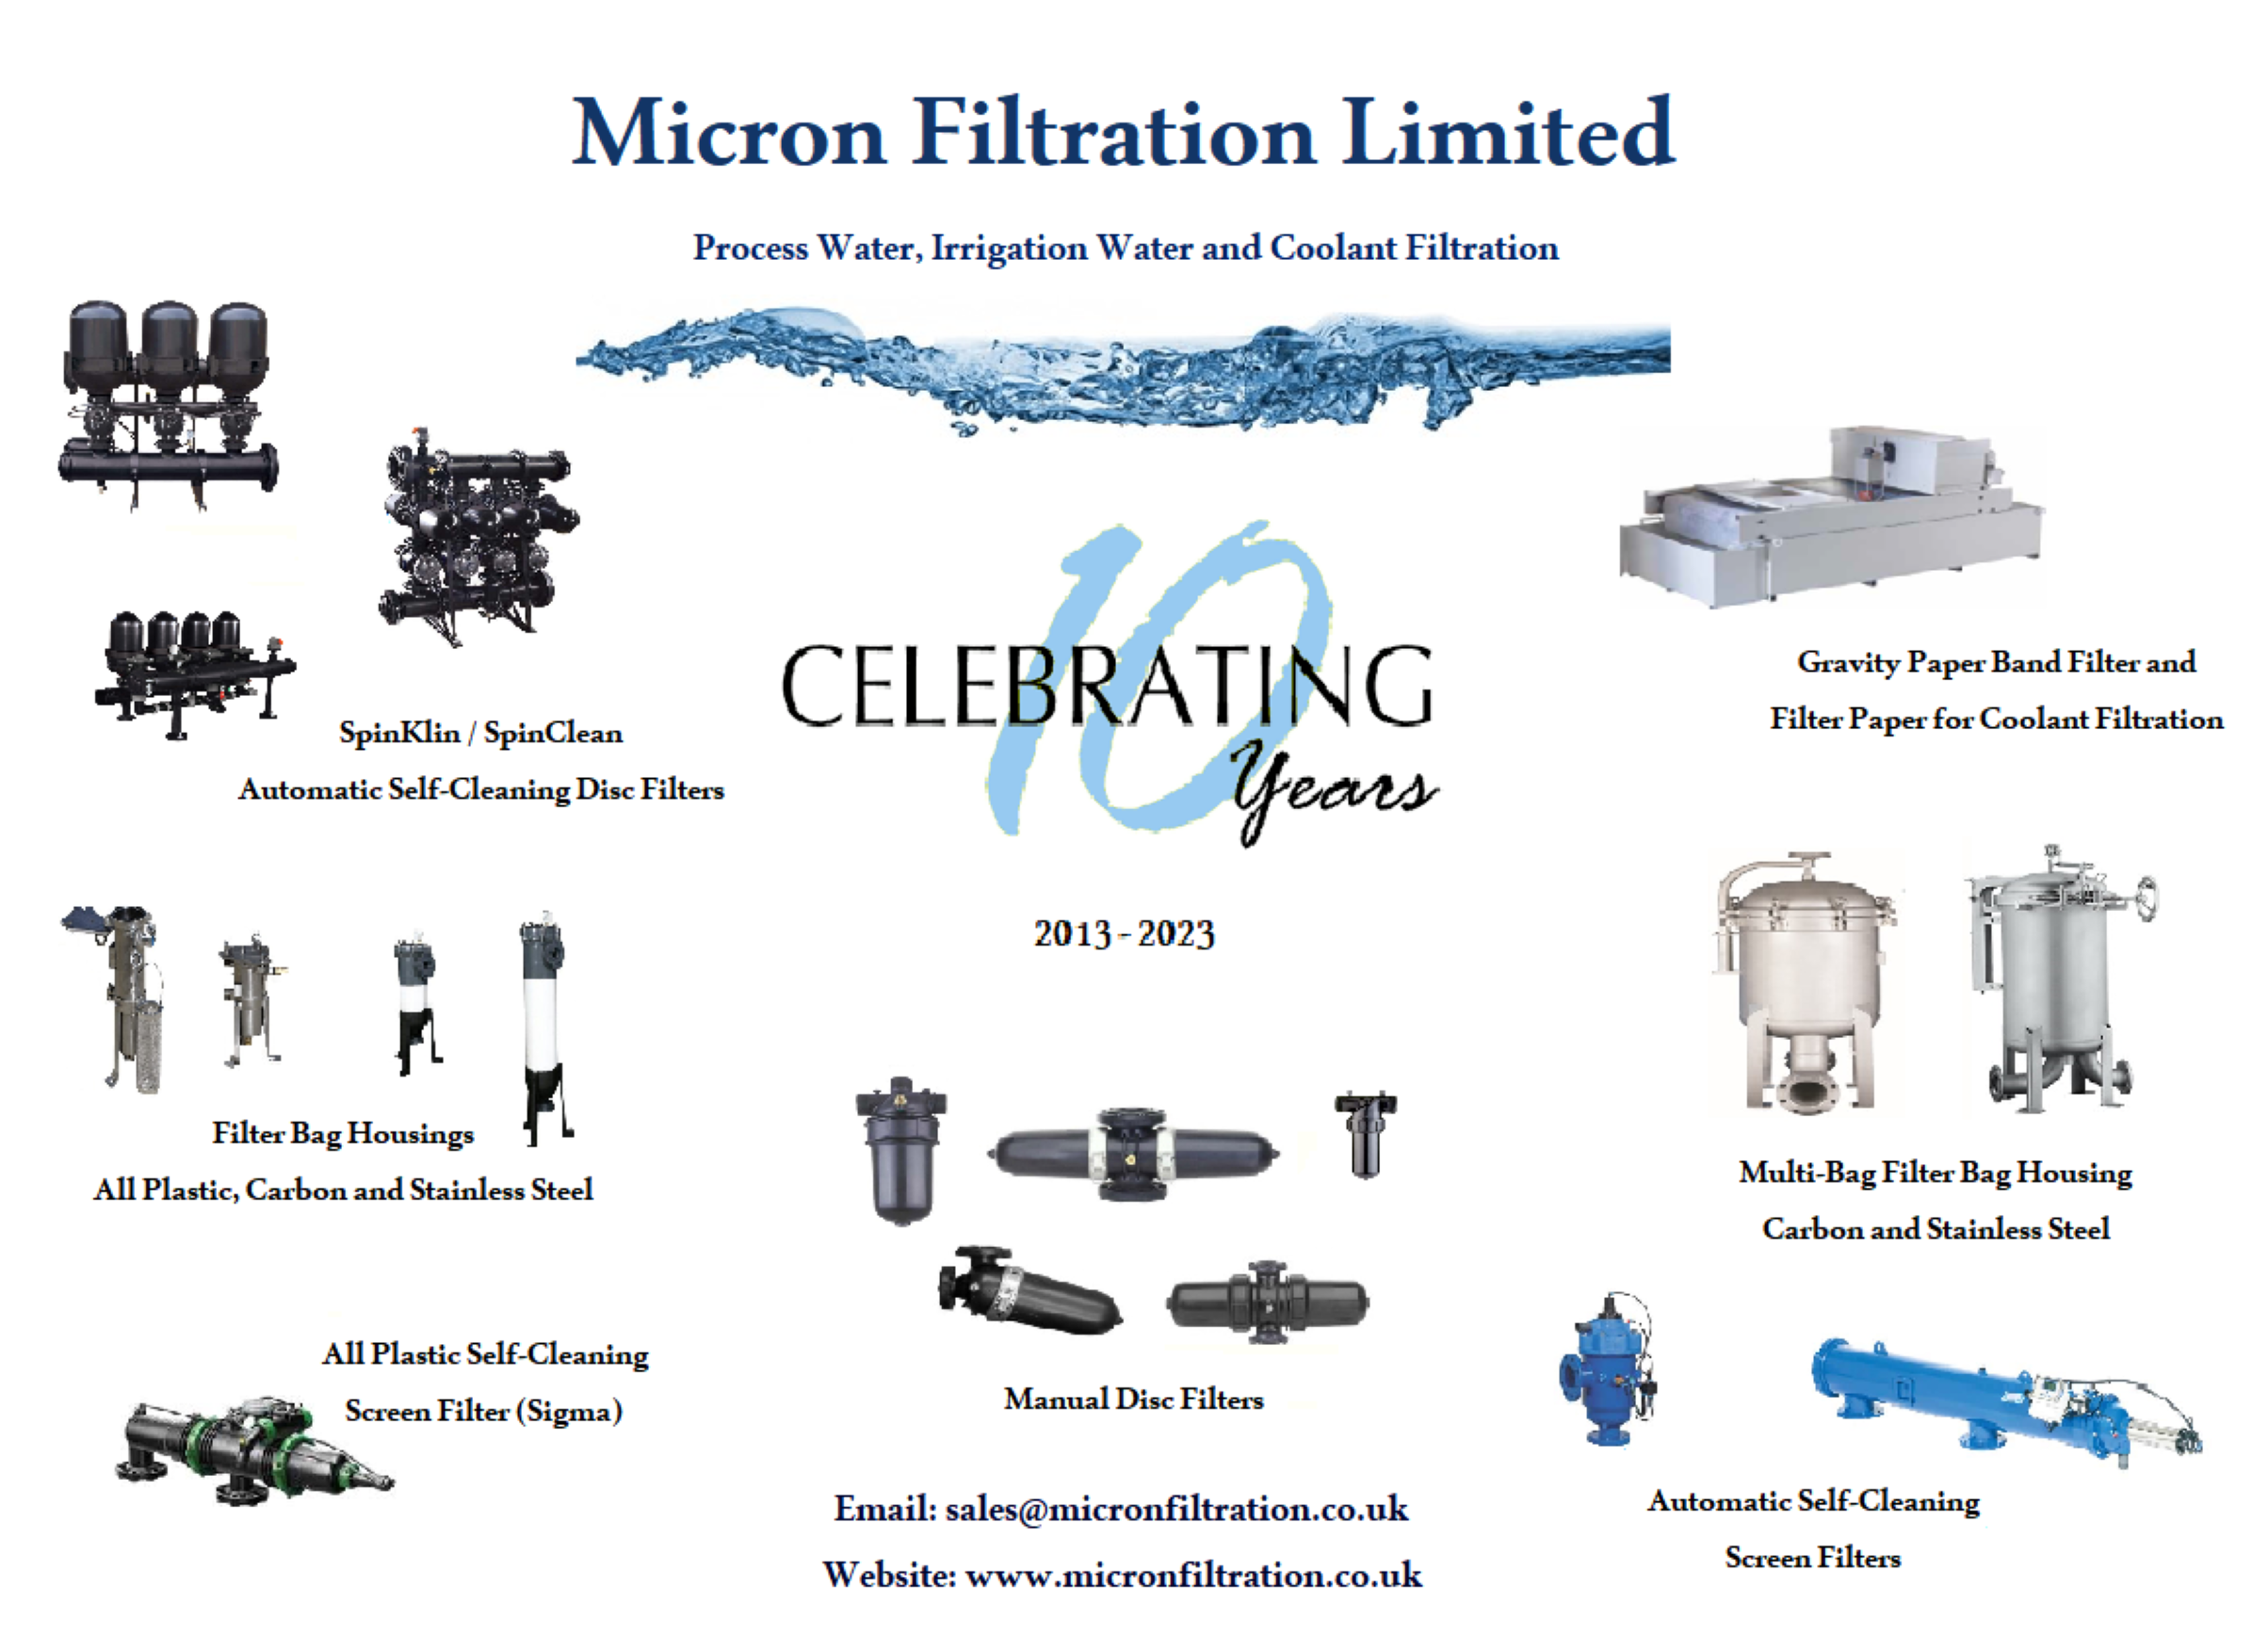 Filter Systems for Process Water, Irrigation Water and CNC Coolant Filtration